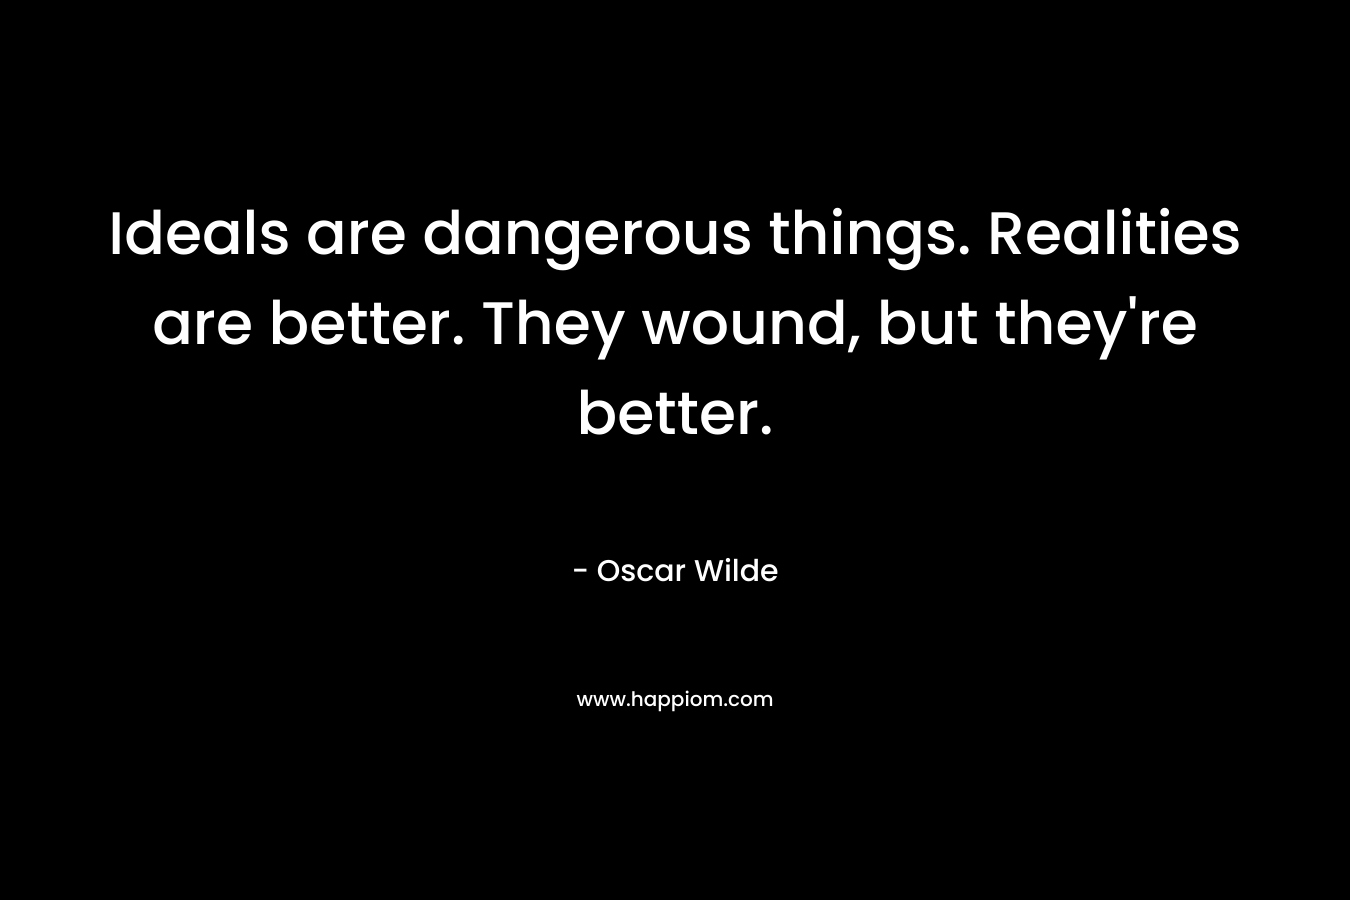 Ideals are dangerous things. Realities are better. They wound, but they're better.